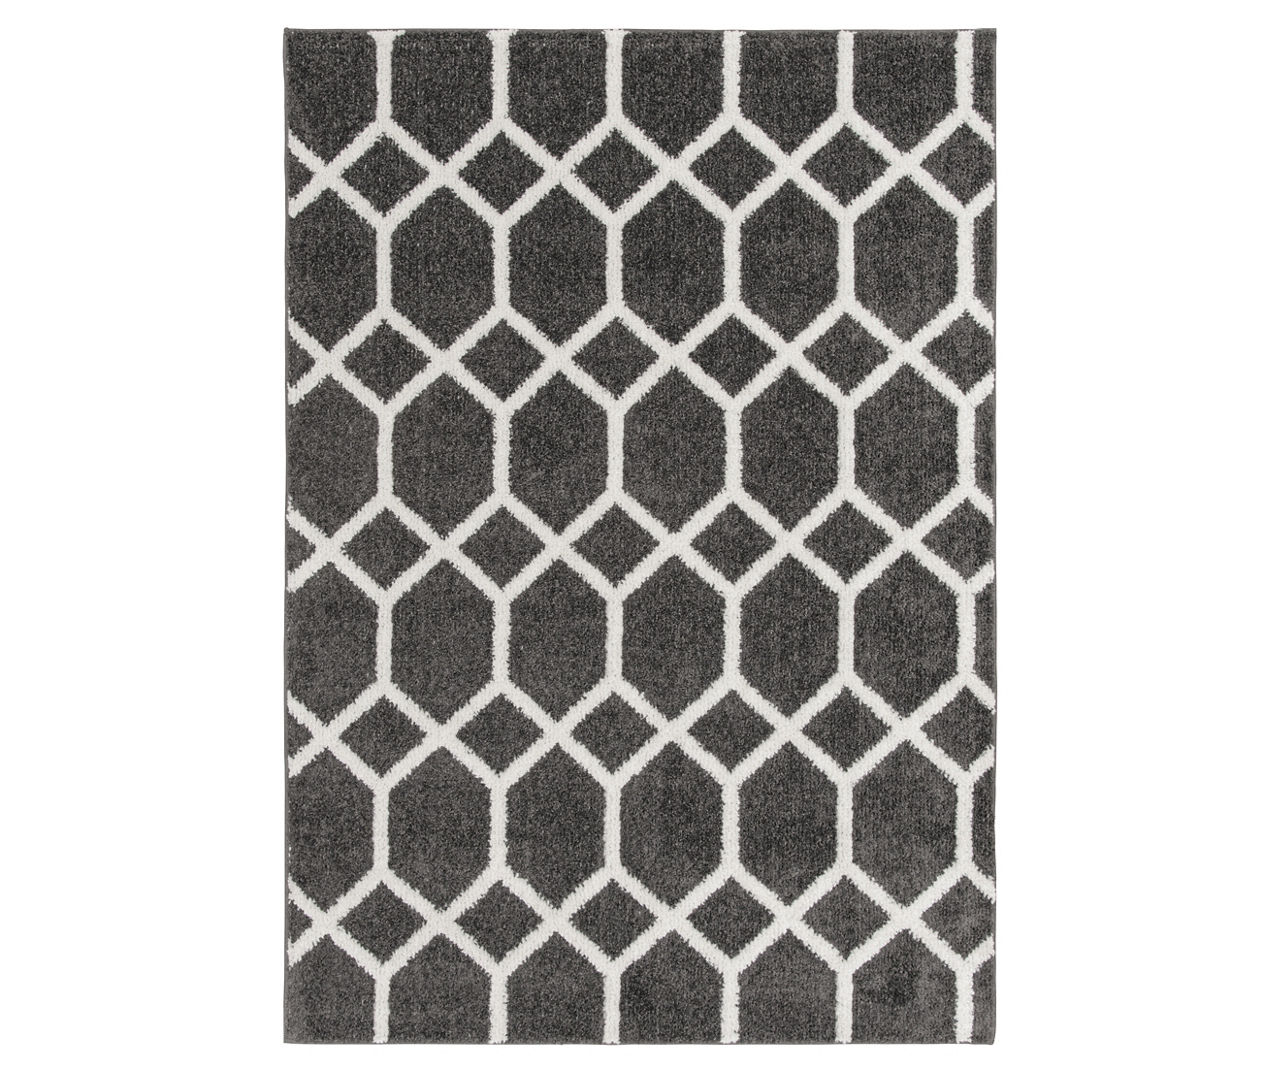 Zion Black & Gray Tufted Area Rug with Non-Slip Back, 5x7, Sold by at Home